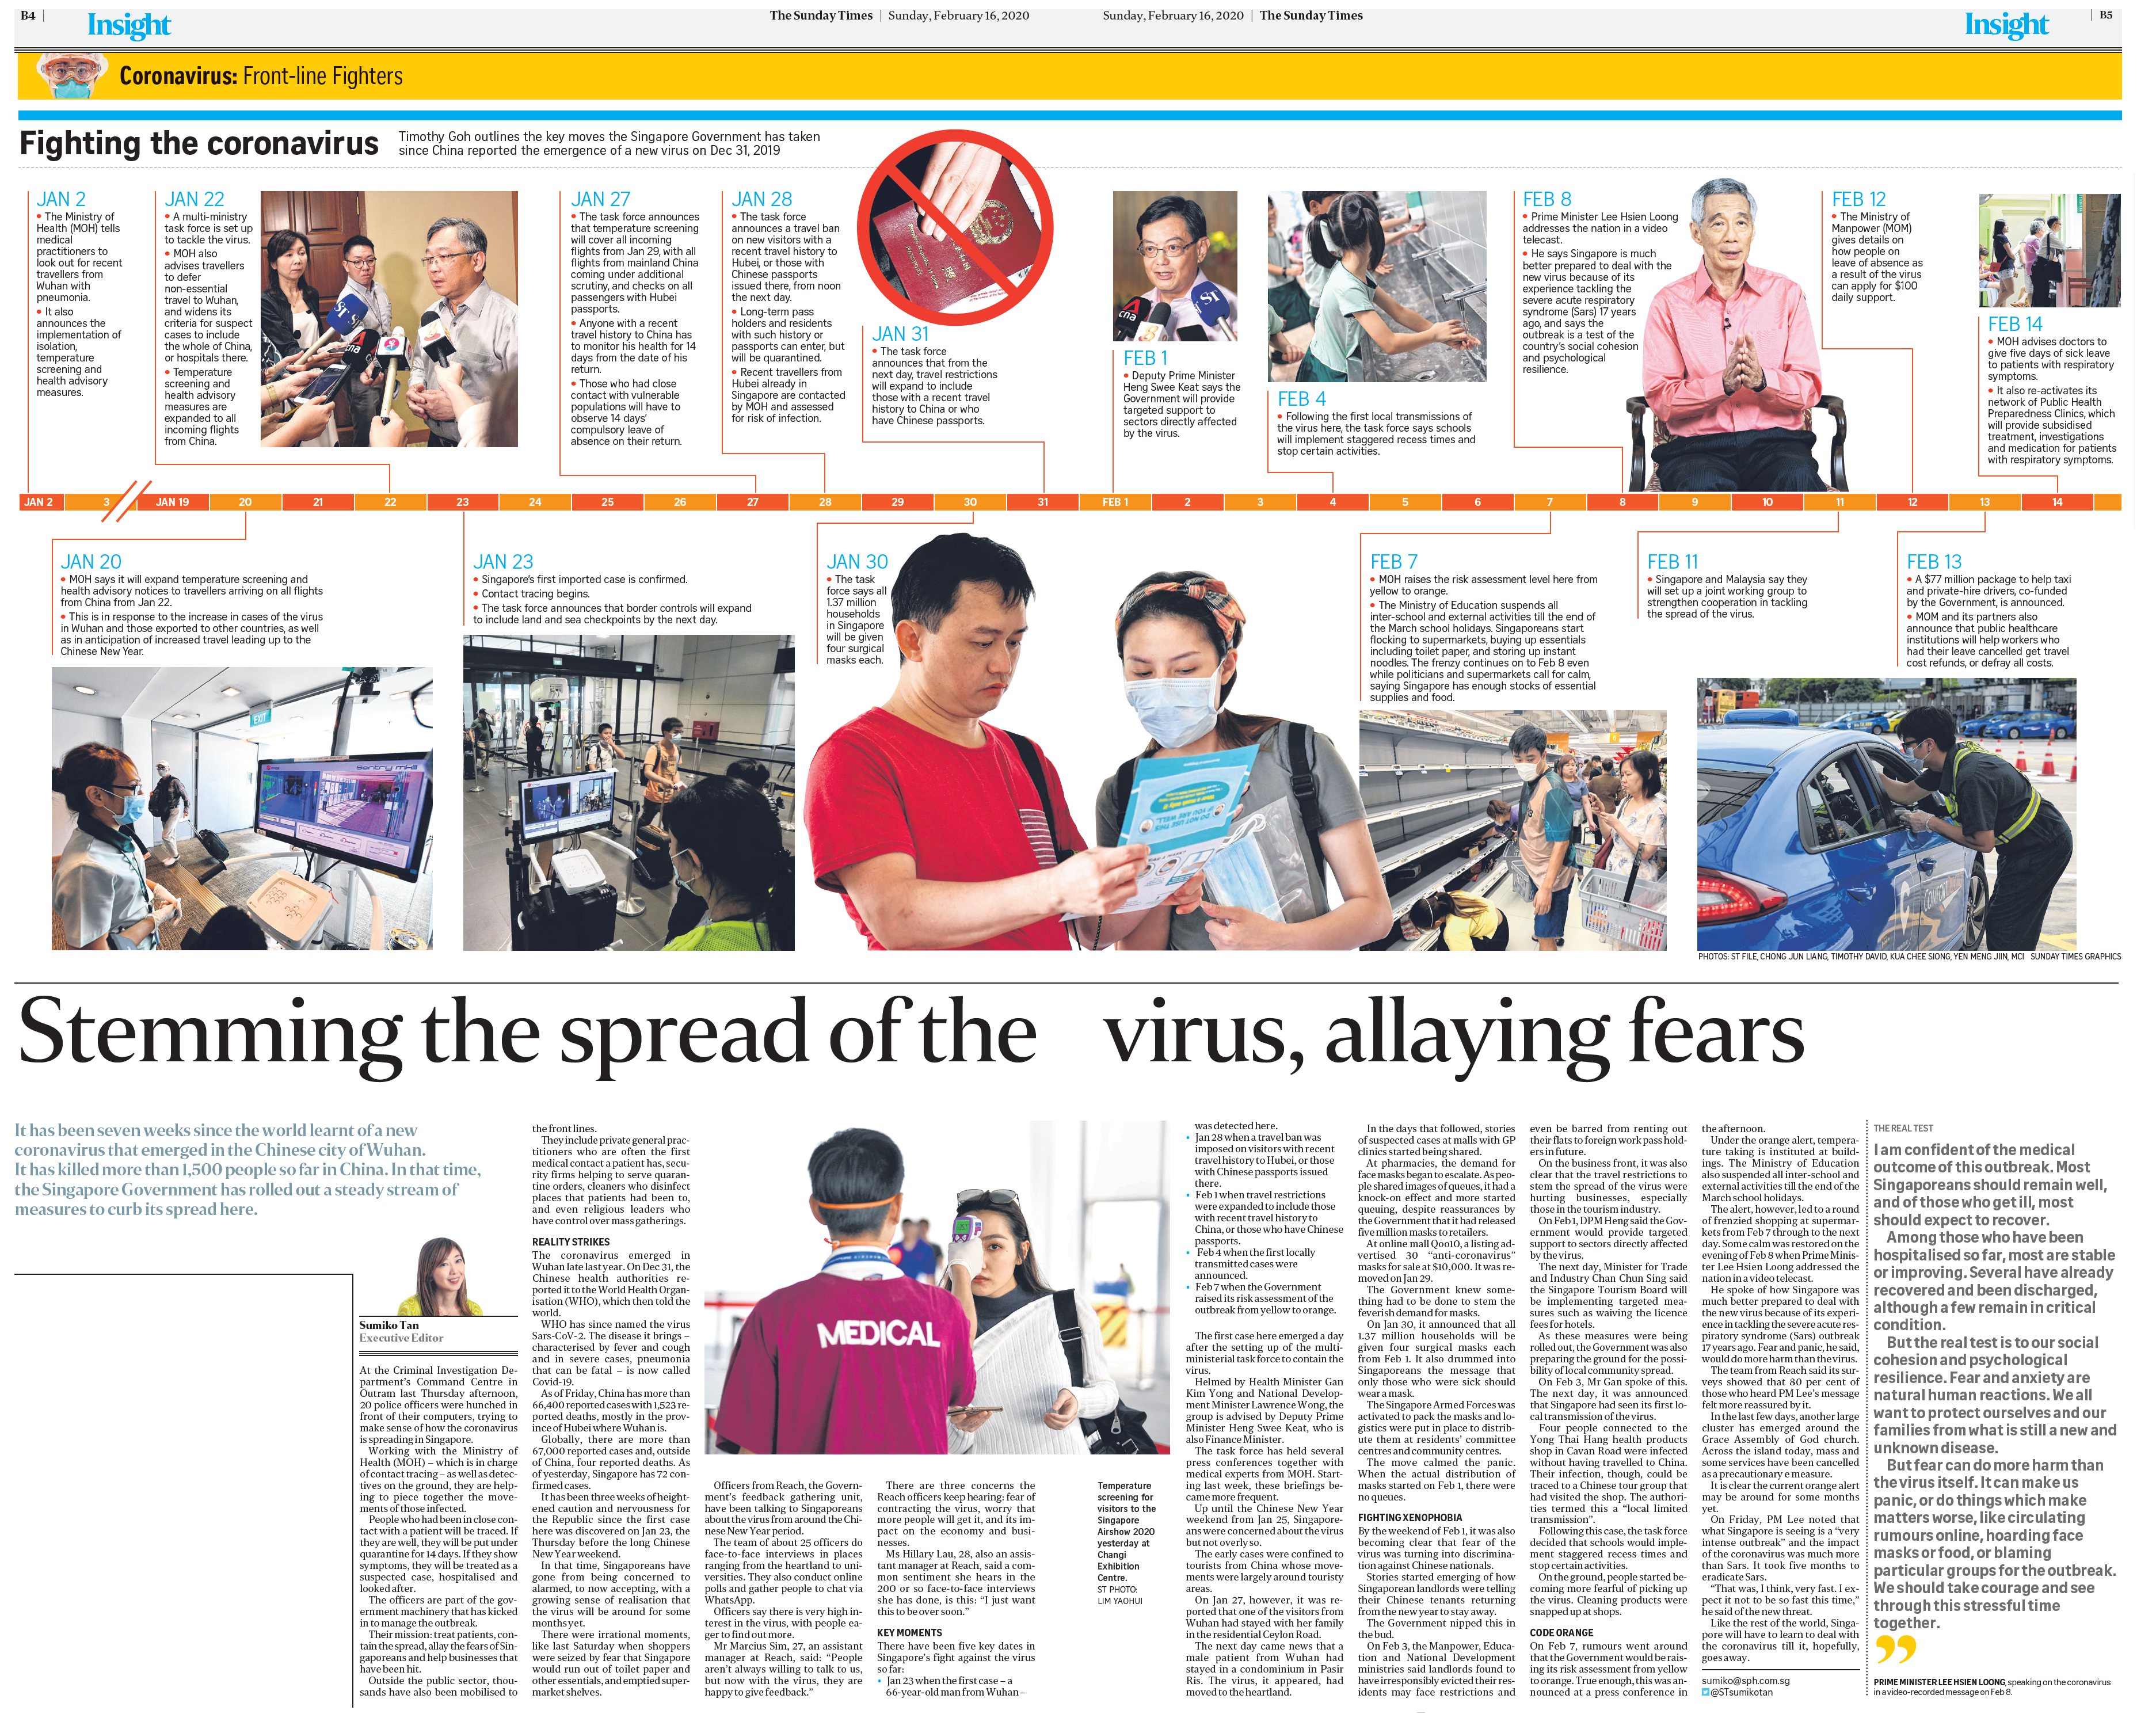 Stemming the spread of the virus, allaying fears (The Sunday Times, 16 Feb 2020, pB4-5)_ Fighting the coronavirus (The Sunday Times, 16 Feb 2020, pB4-5)